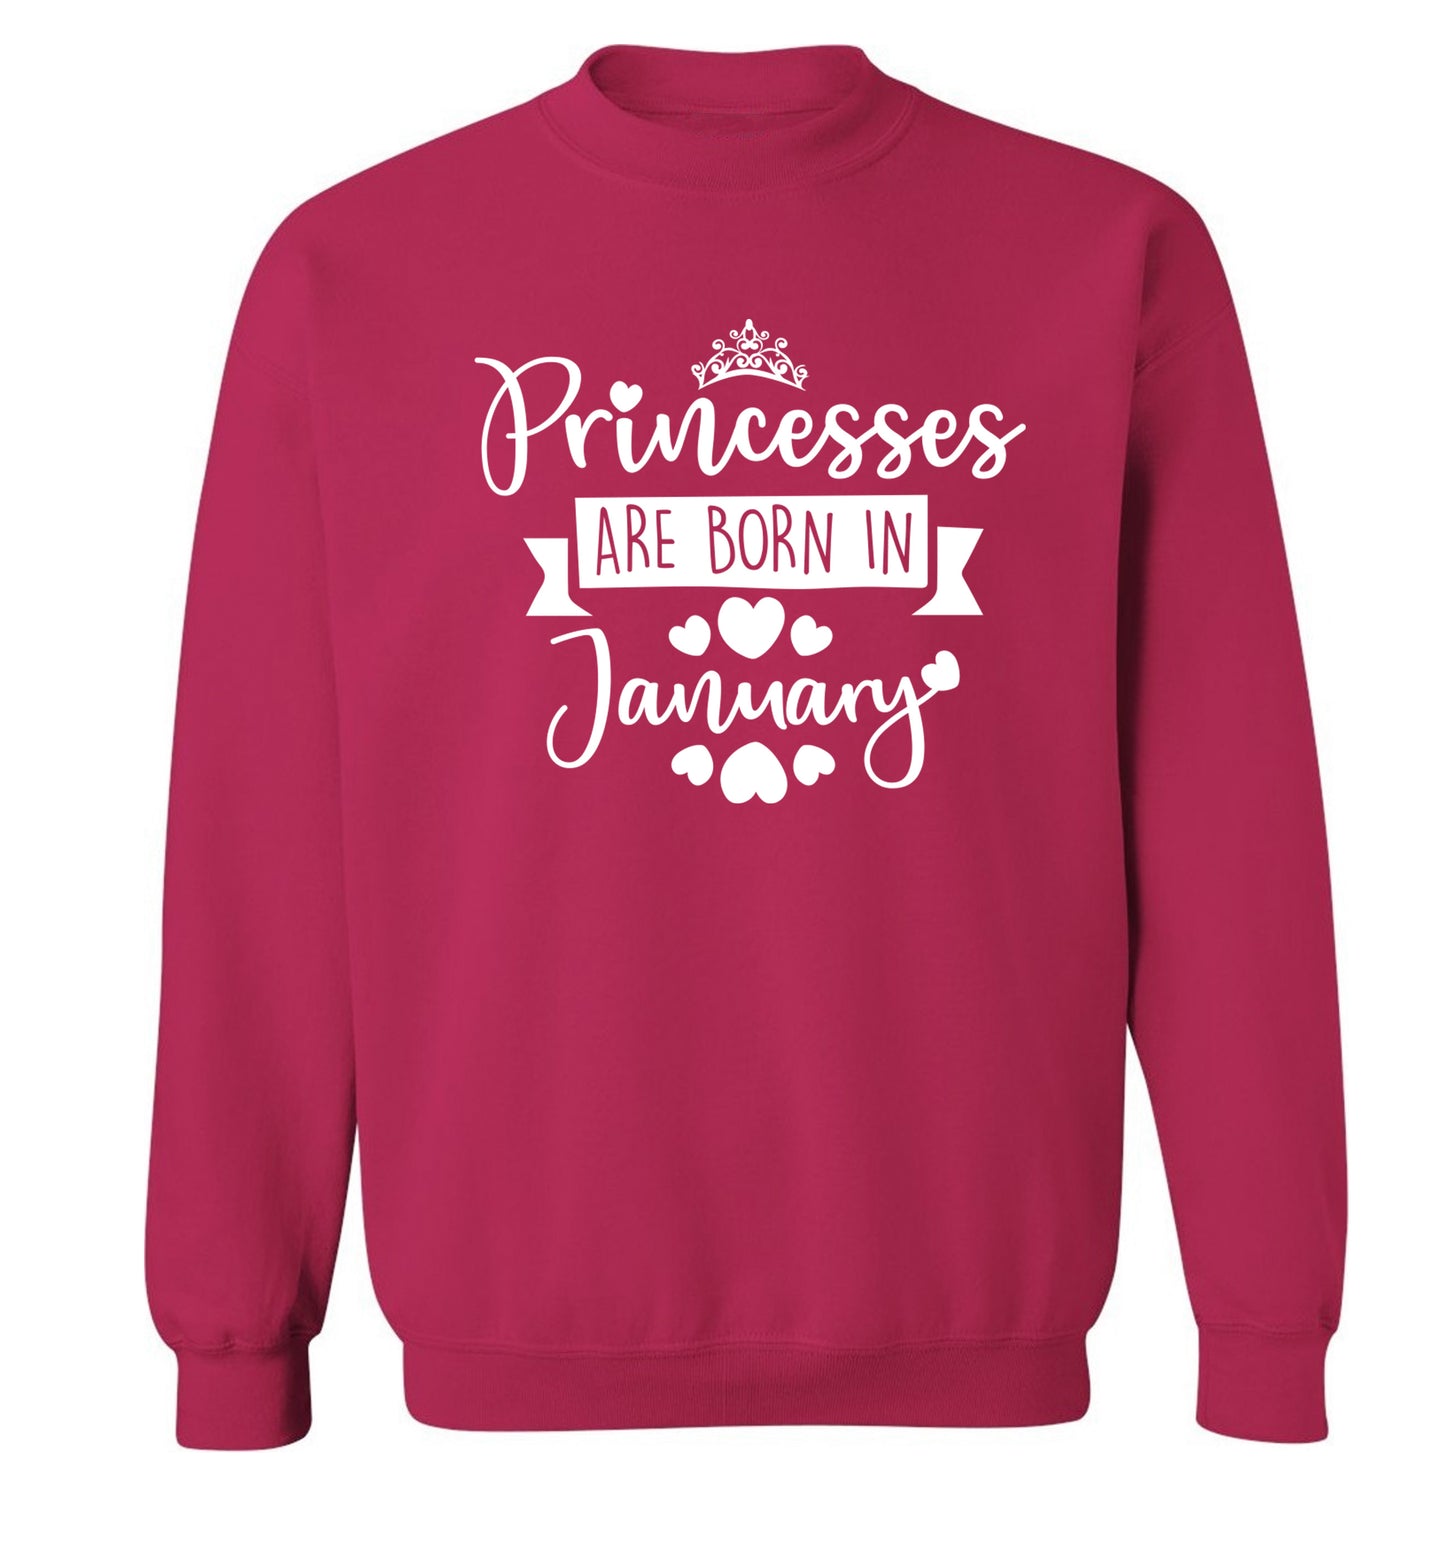 Princesses are born in November Adult's unisex pink Sweater 2XL